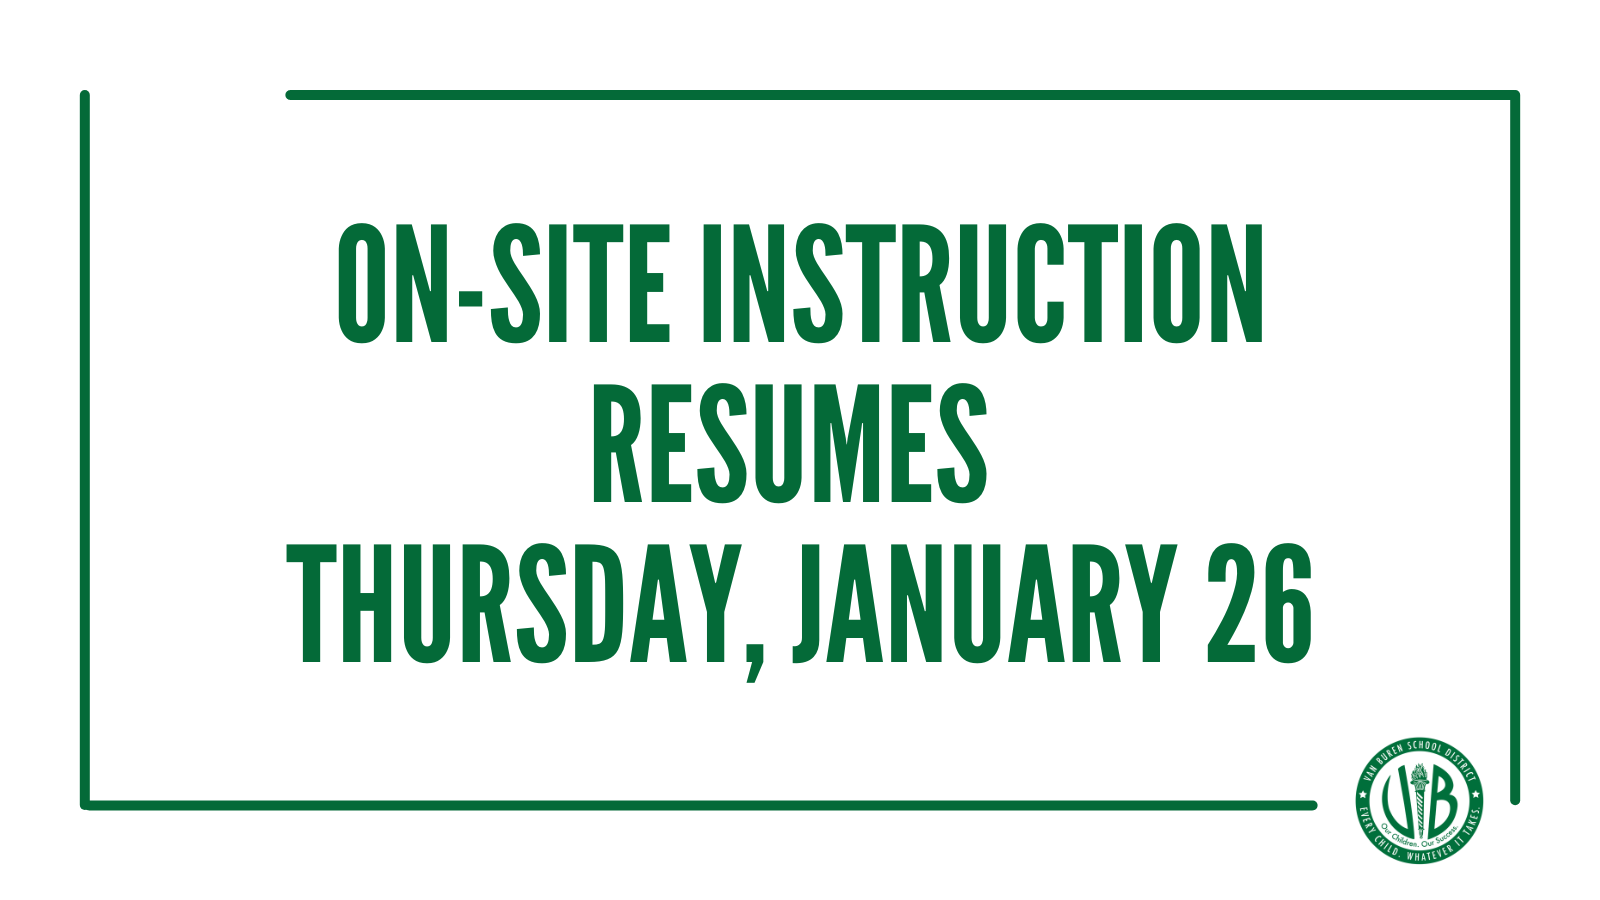 VBSD to resume on-site instruction Thursday, January 26